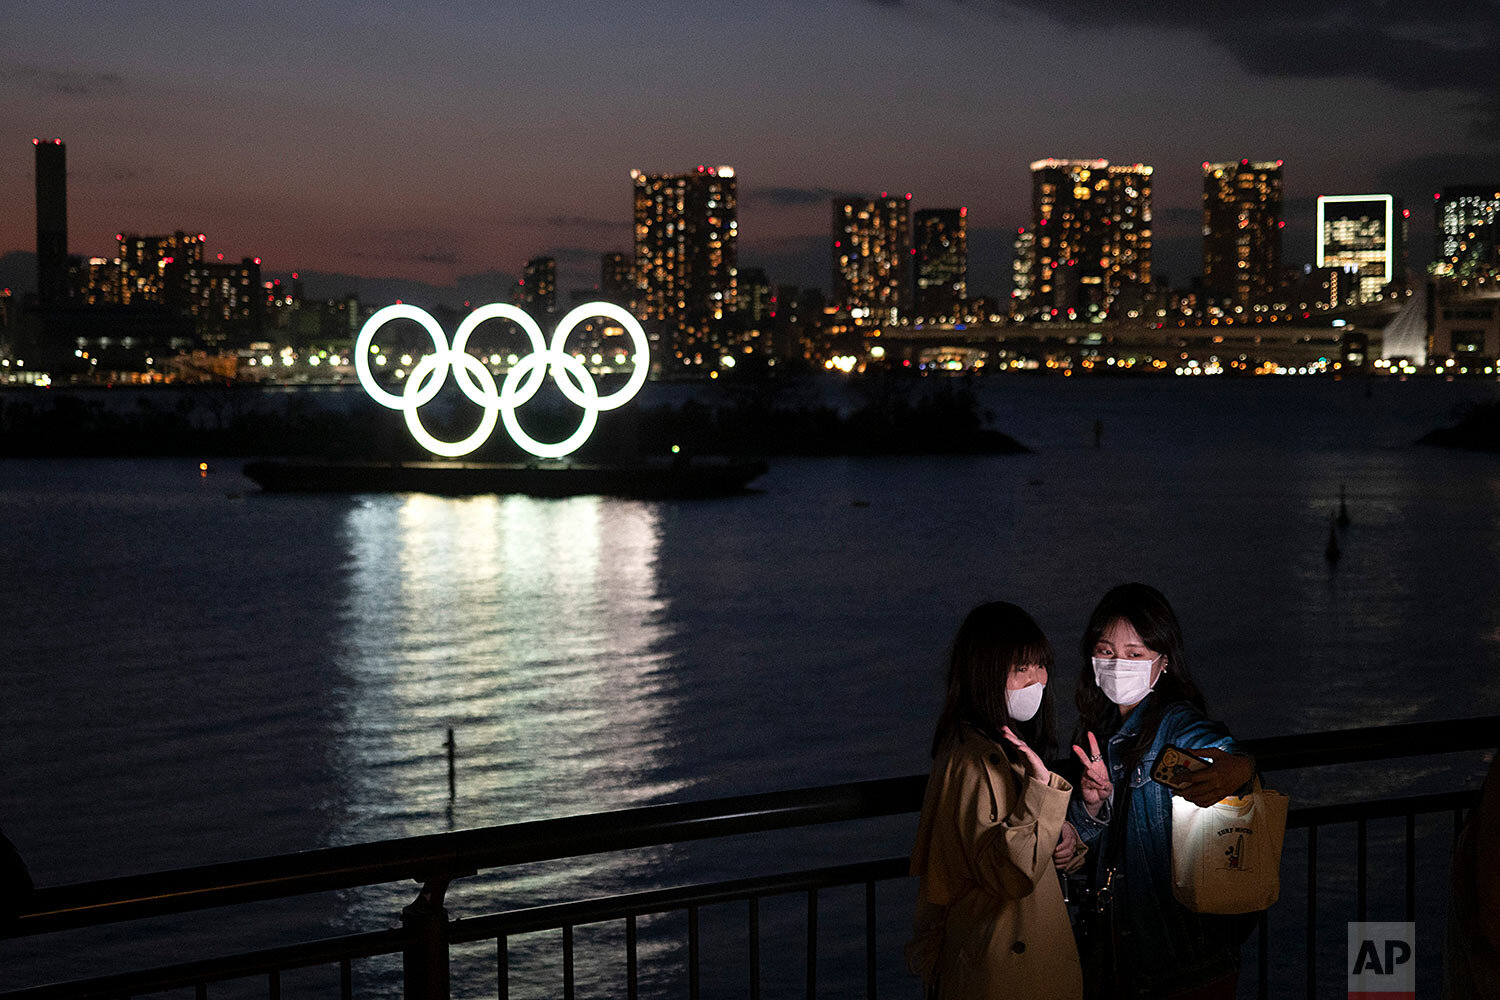  Two women take a selfie with the Olympic rings in the background in the Odaiba section of Tokyo, Thursday, March 12, 2020. (AP Photo/Jae C. Hong) 